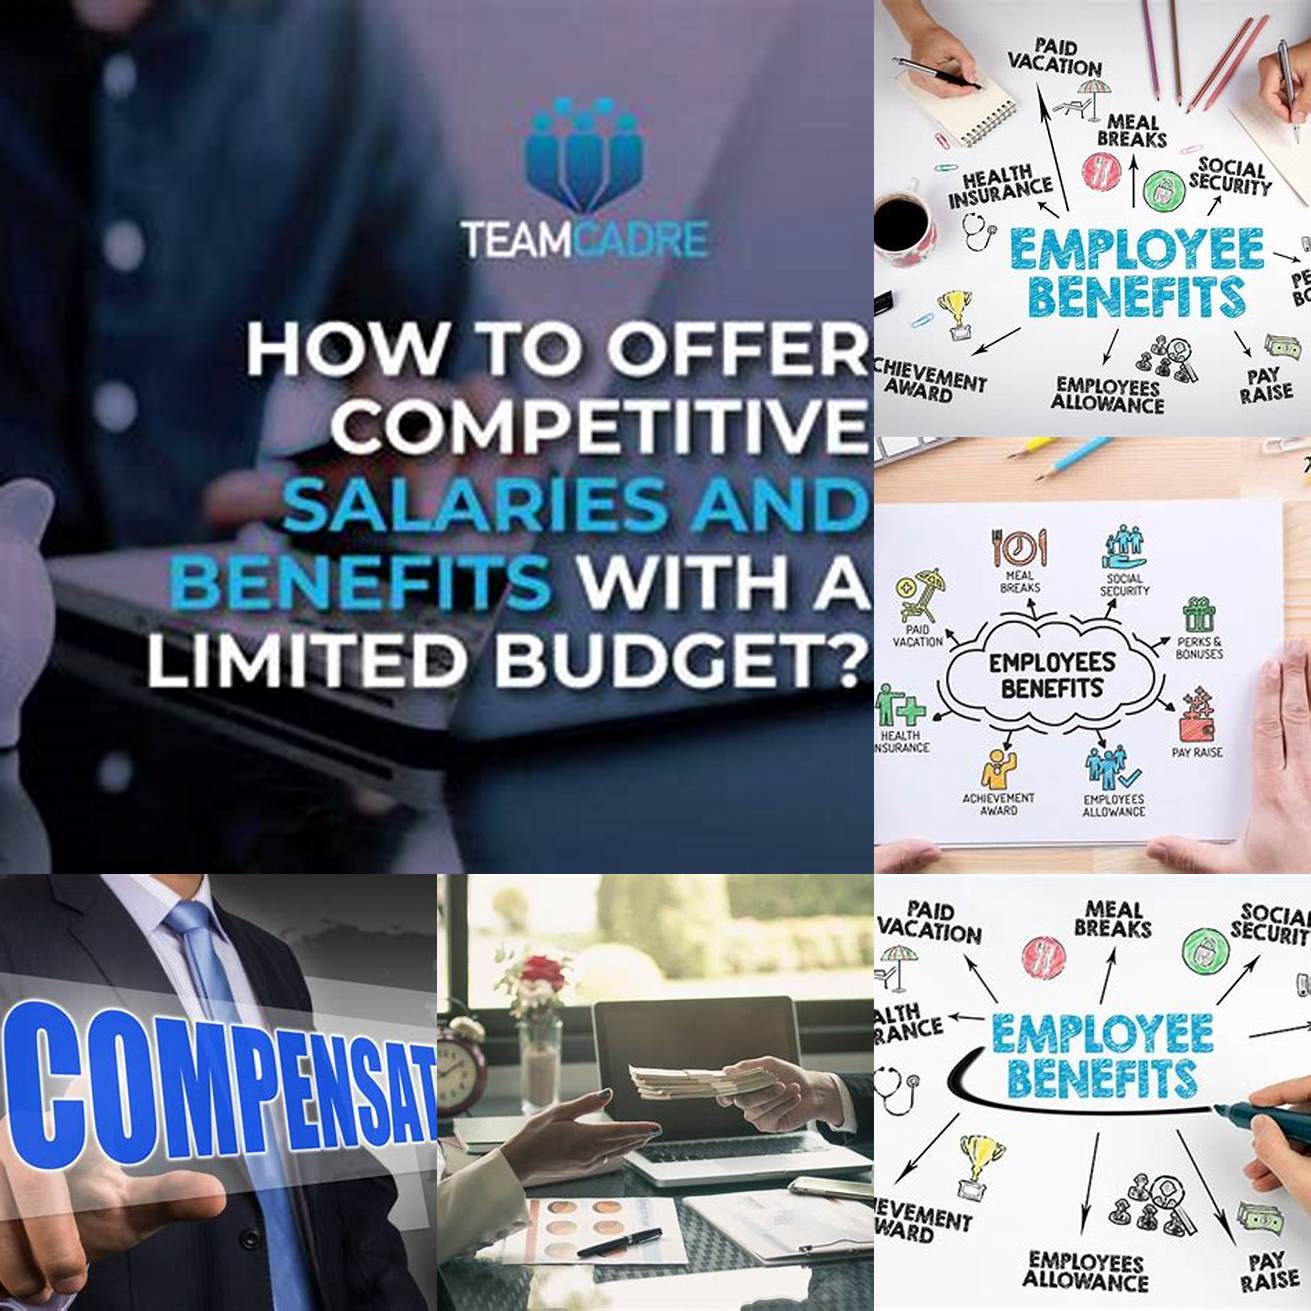 1 Offer competitive salaries and benefits